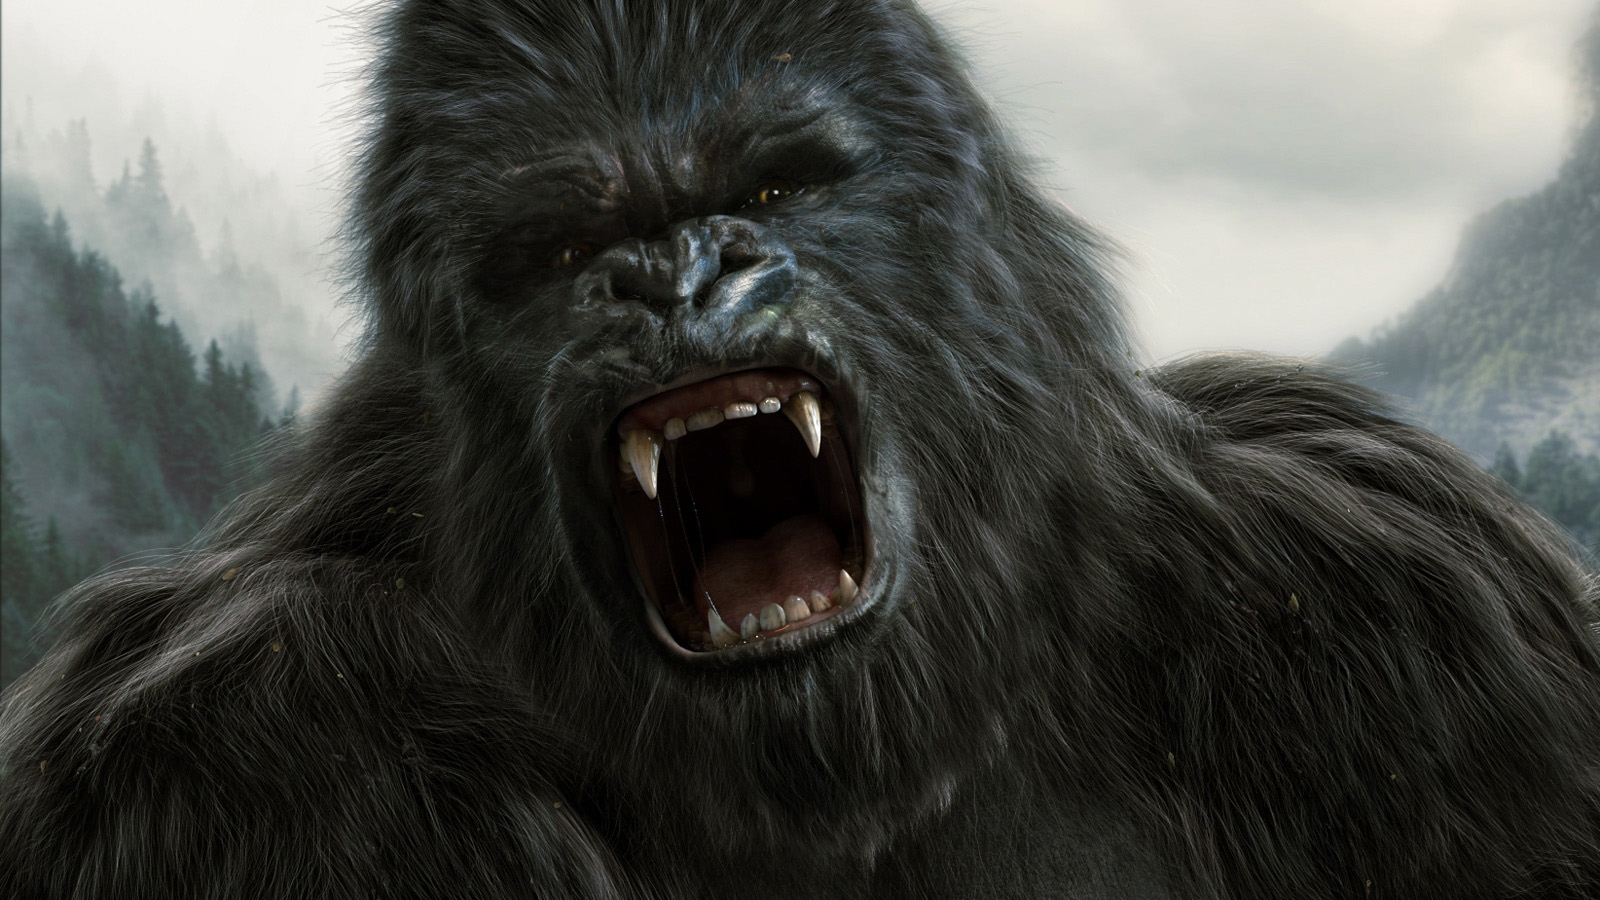 king kong wallpaper,primate,snout,fictional character